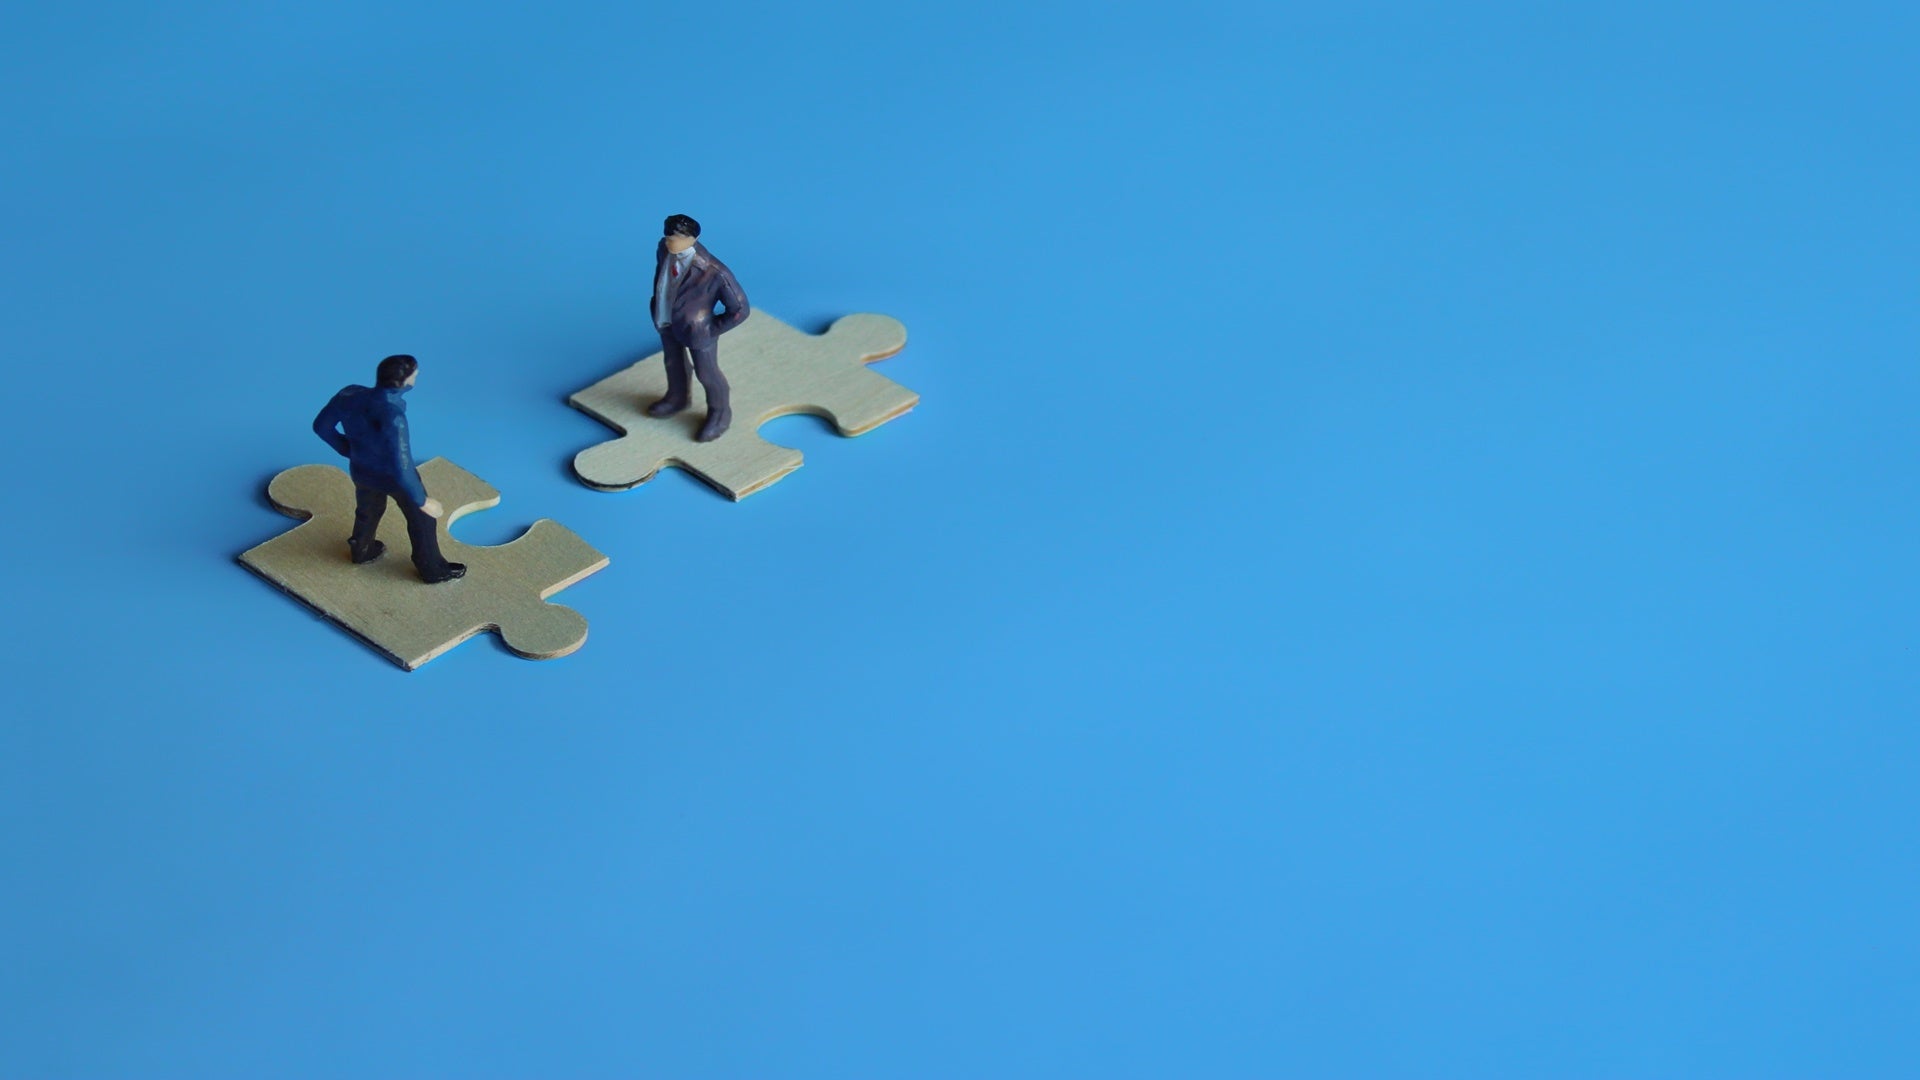 Business mergers and acquisitions, partnership concept. Two miniature people merging on puzzle. Copy space for text